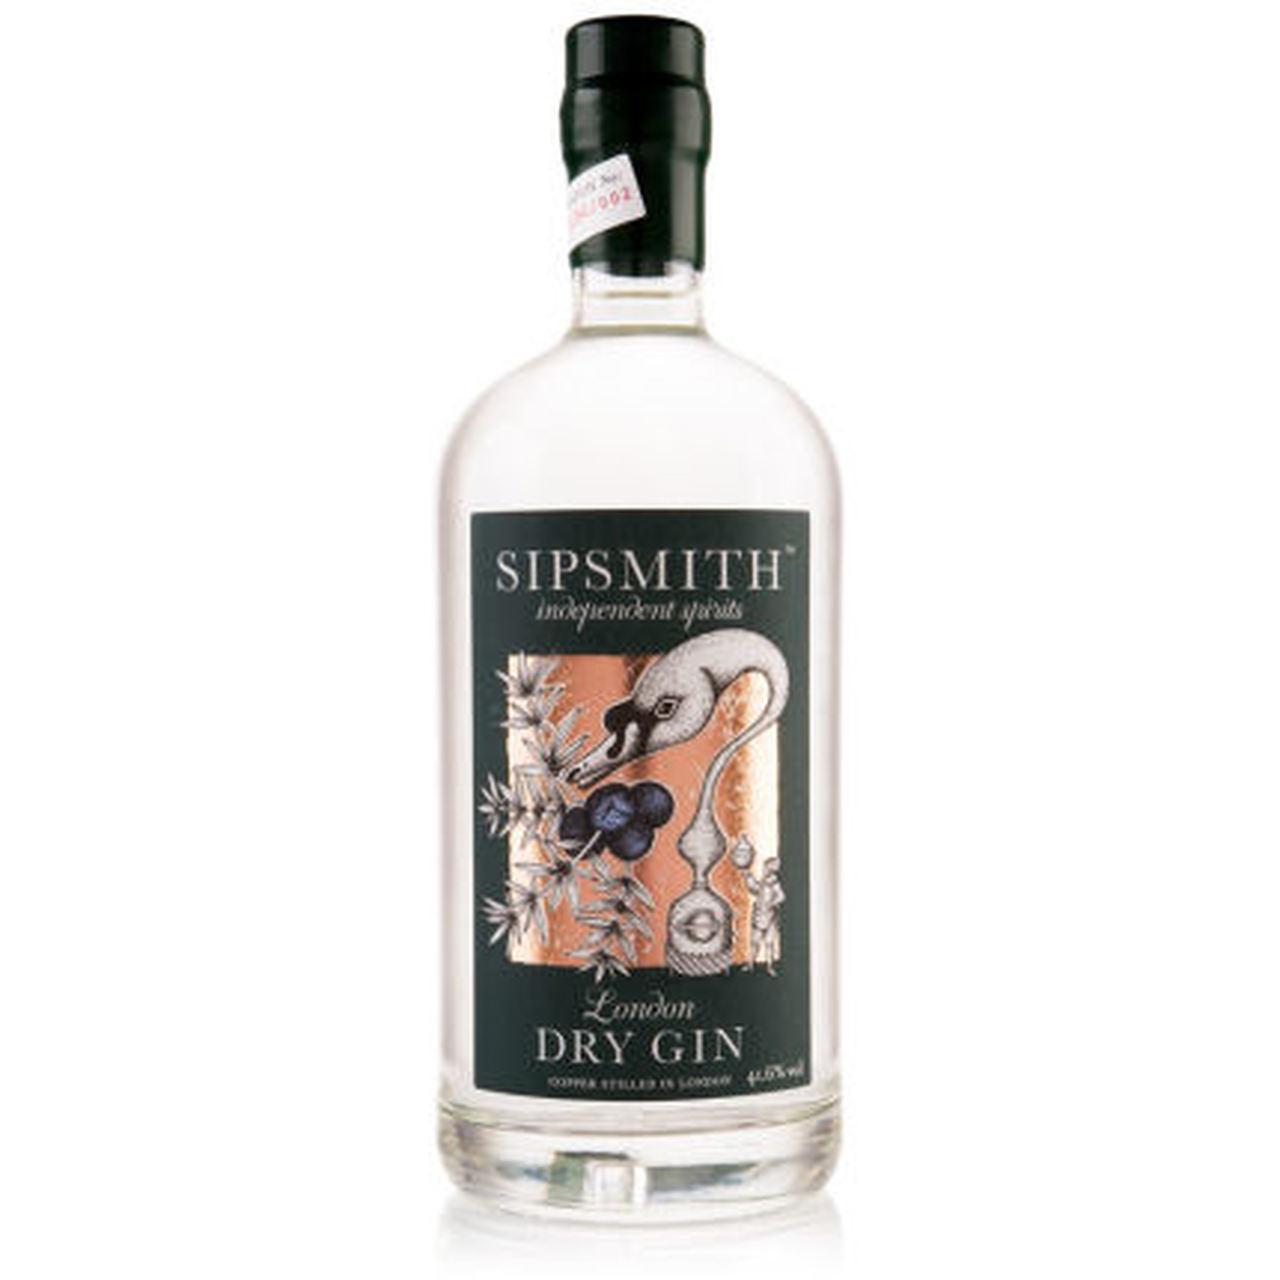 Sipsmith - 'London' Dry Gin (375ML) - The Epicurean Trader